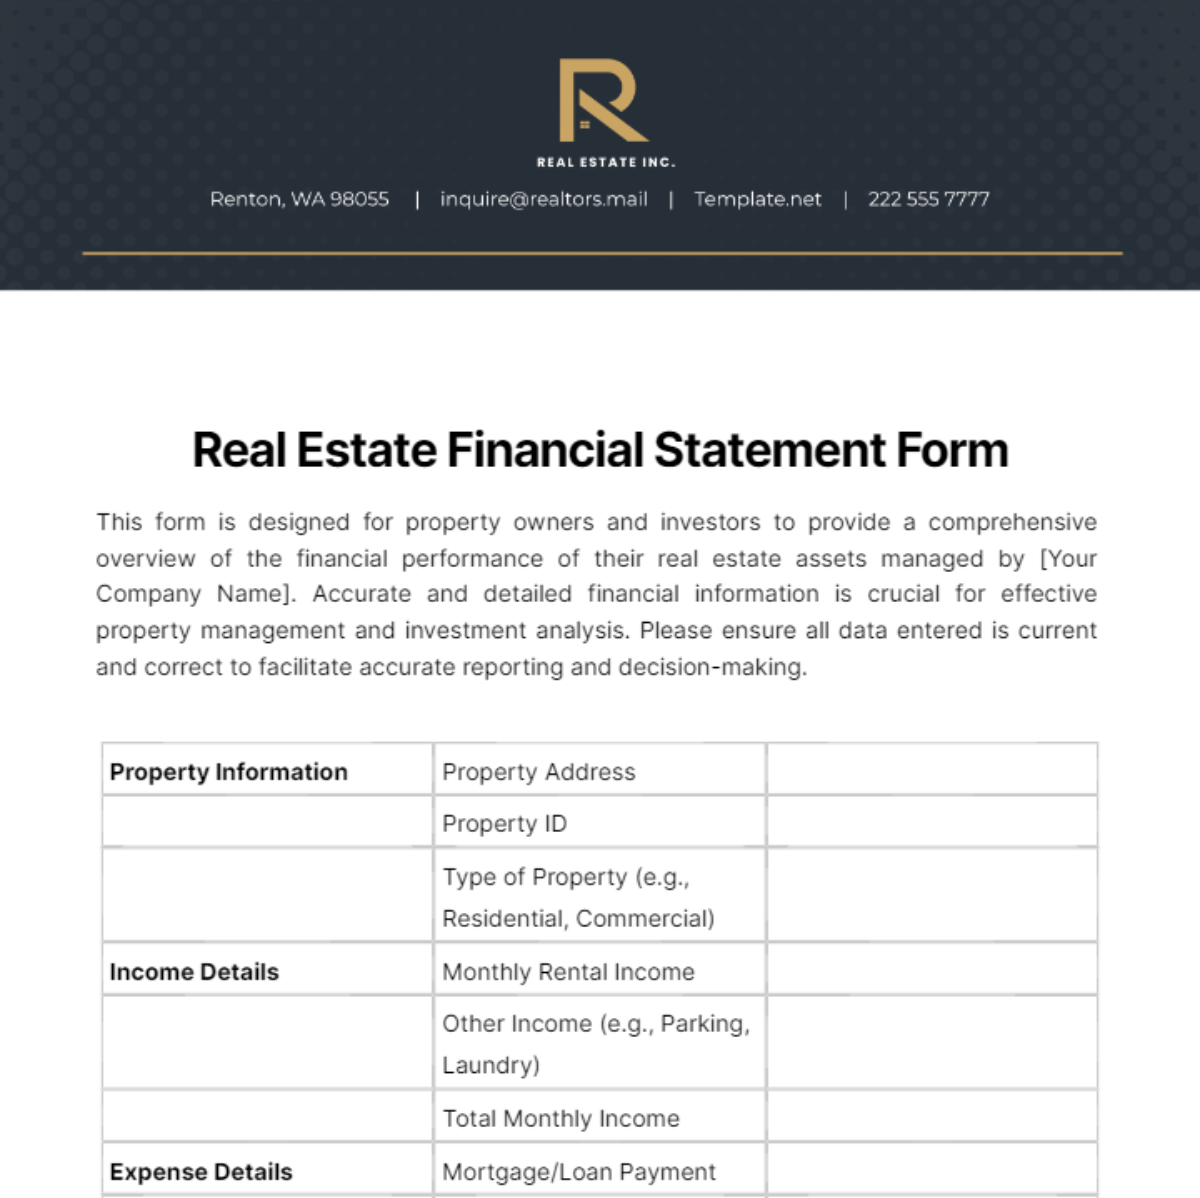 Real Estate Financial Statement Form Template